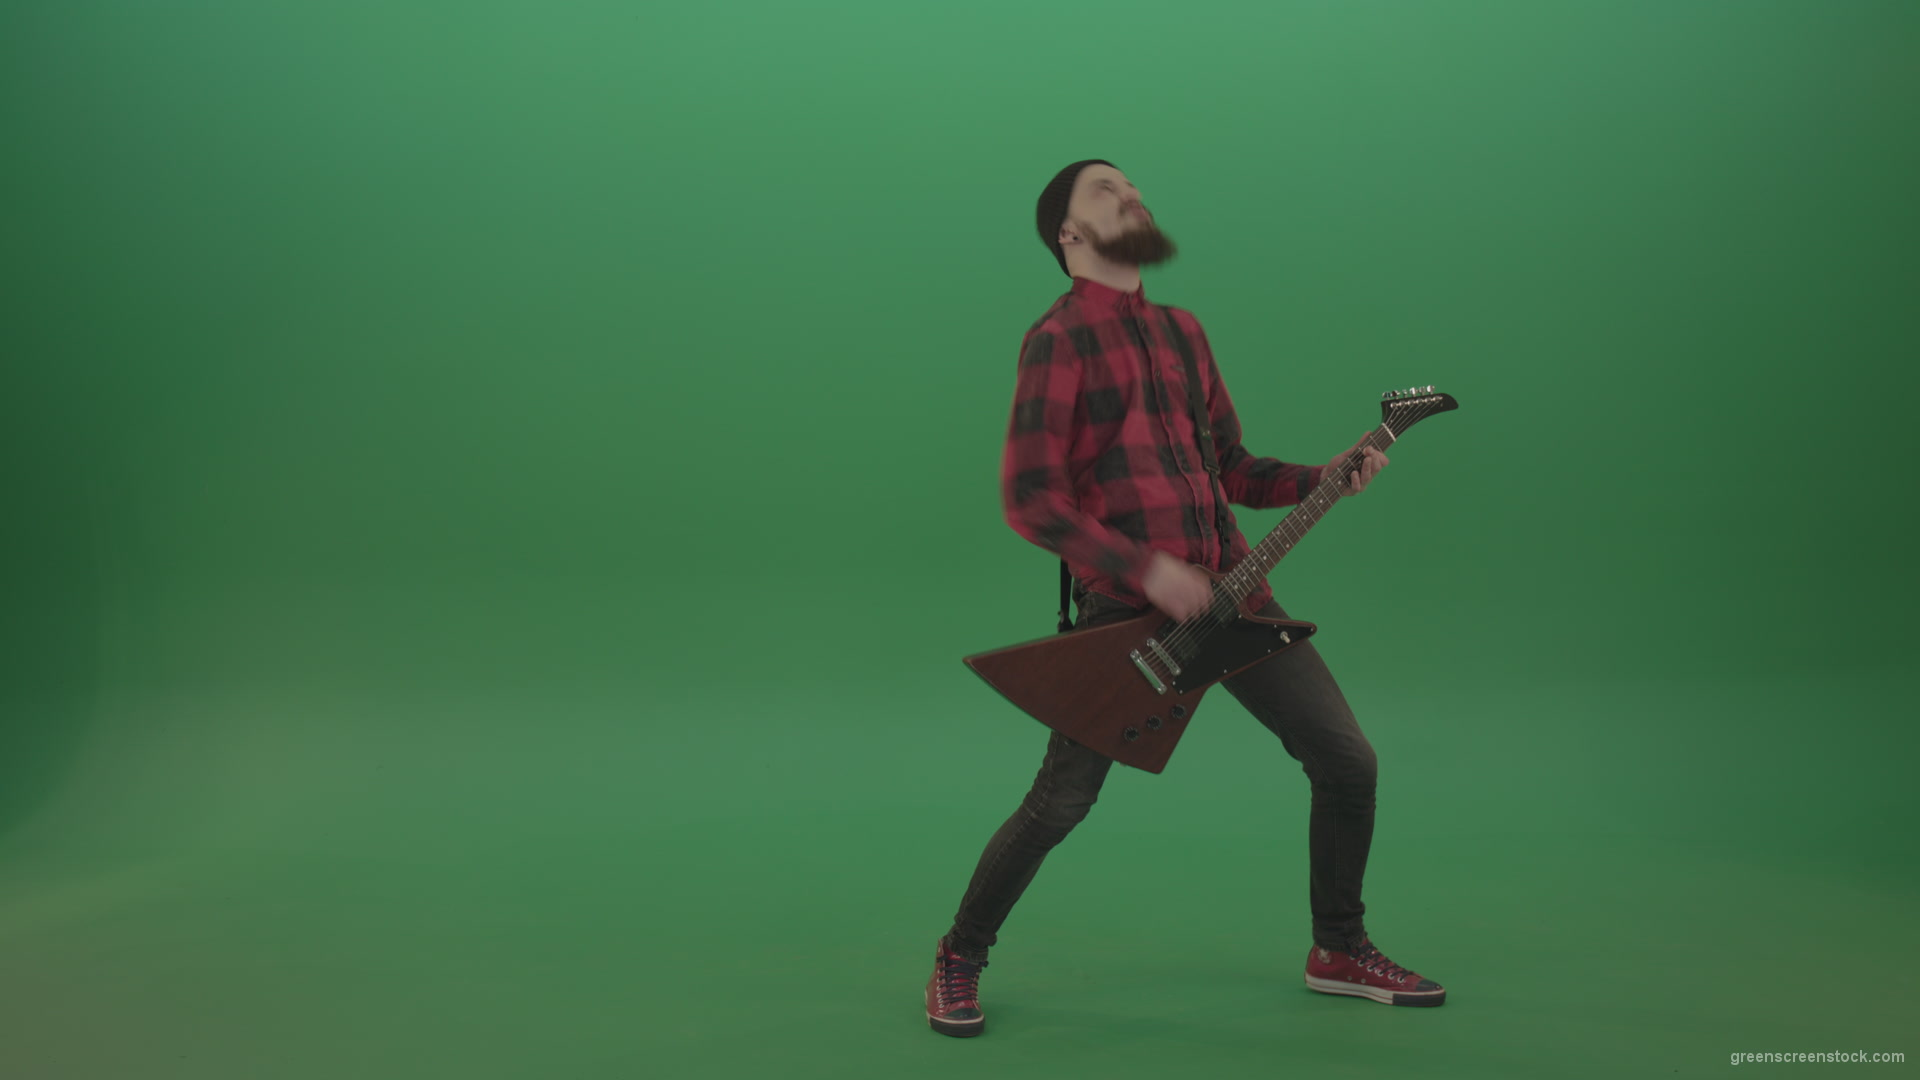 vj video background Punk-rock-full-size-man-guitarist-play-guitar-with-emotions-on-green-screen_003